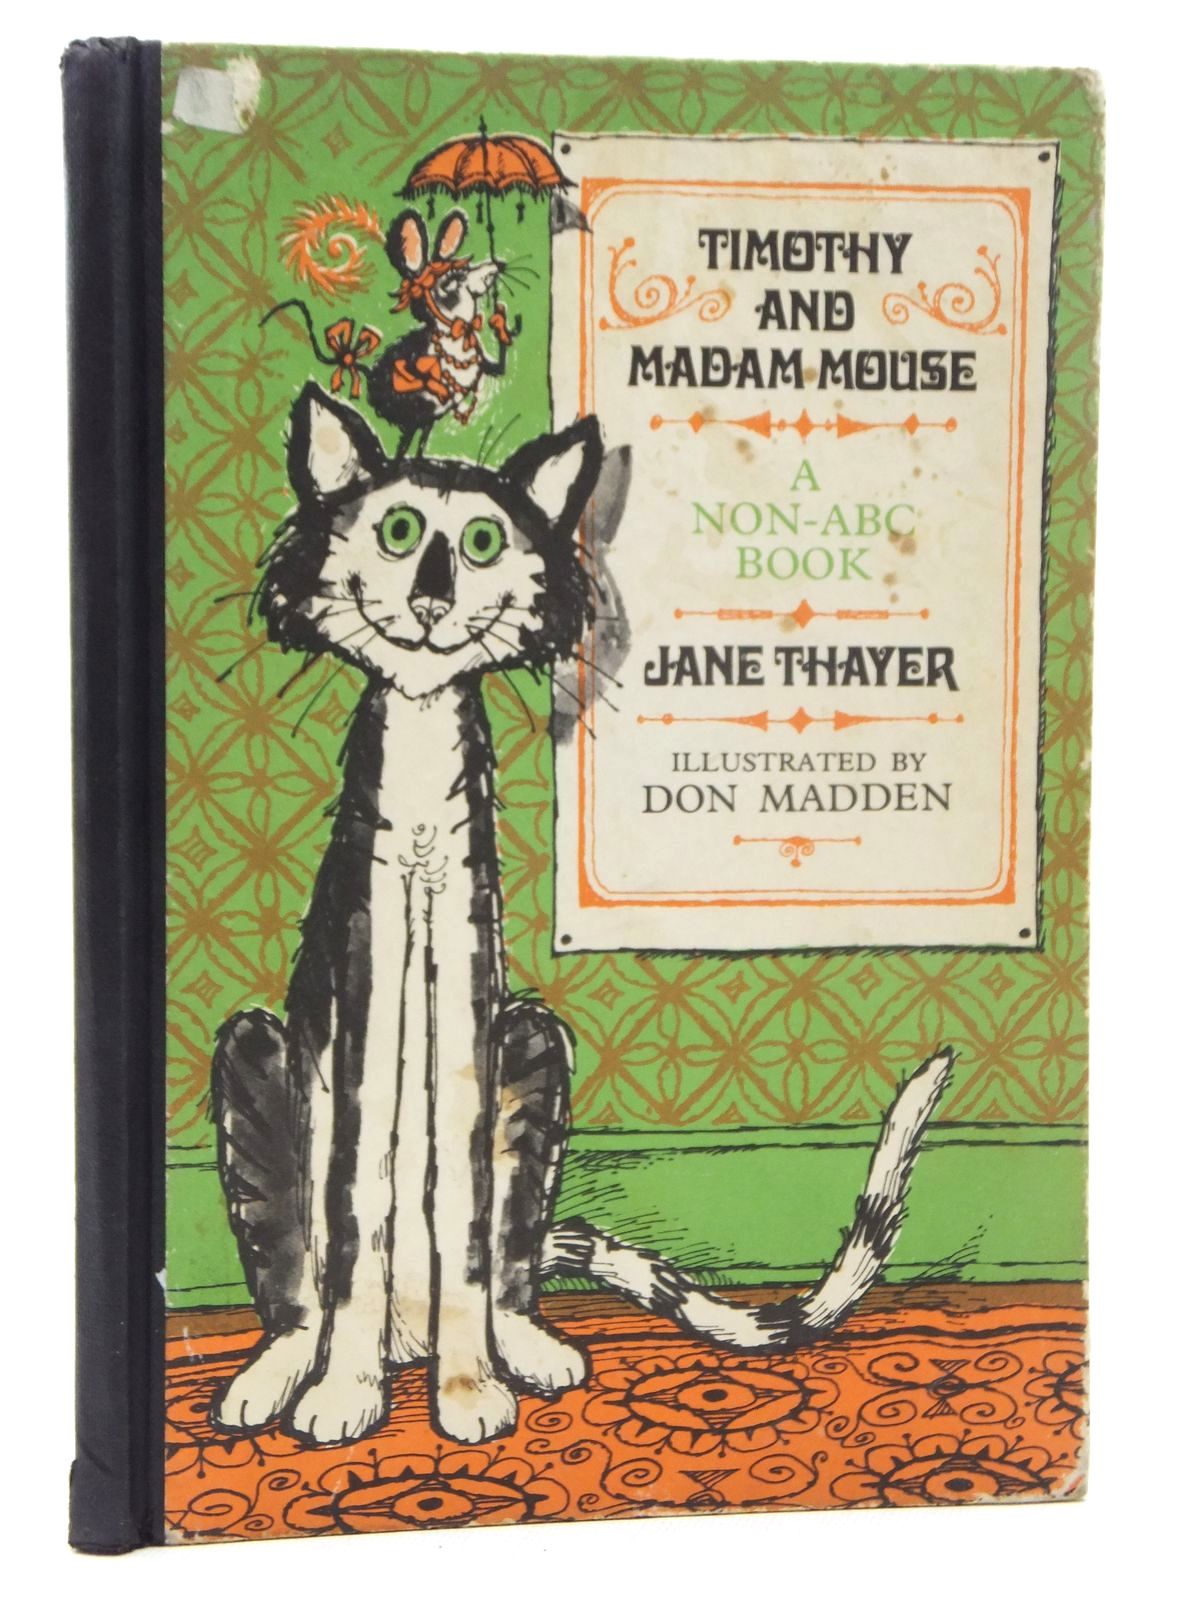 Photo of TIMOTHY AND MADAM MOUSE A NON-ABC BOOK written by Thayer, Jane illustrated by Madden, Don published by World's Work Ltd. (STOCK CODE: 2123794)  for sale by Stella & Rose's Books